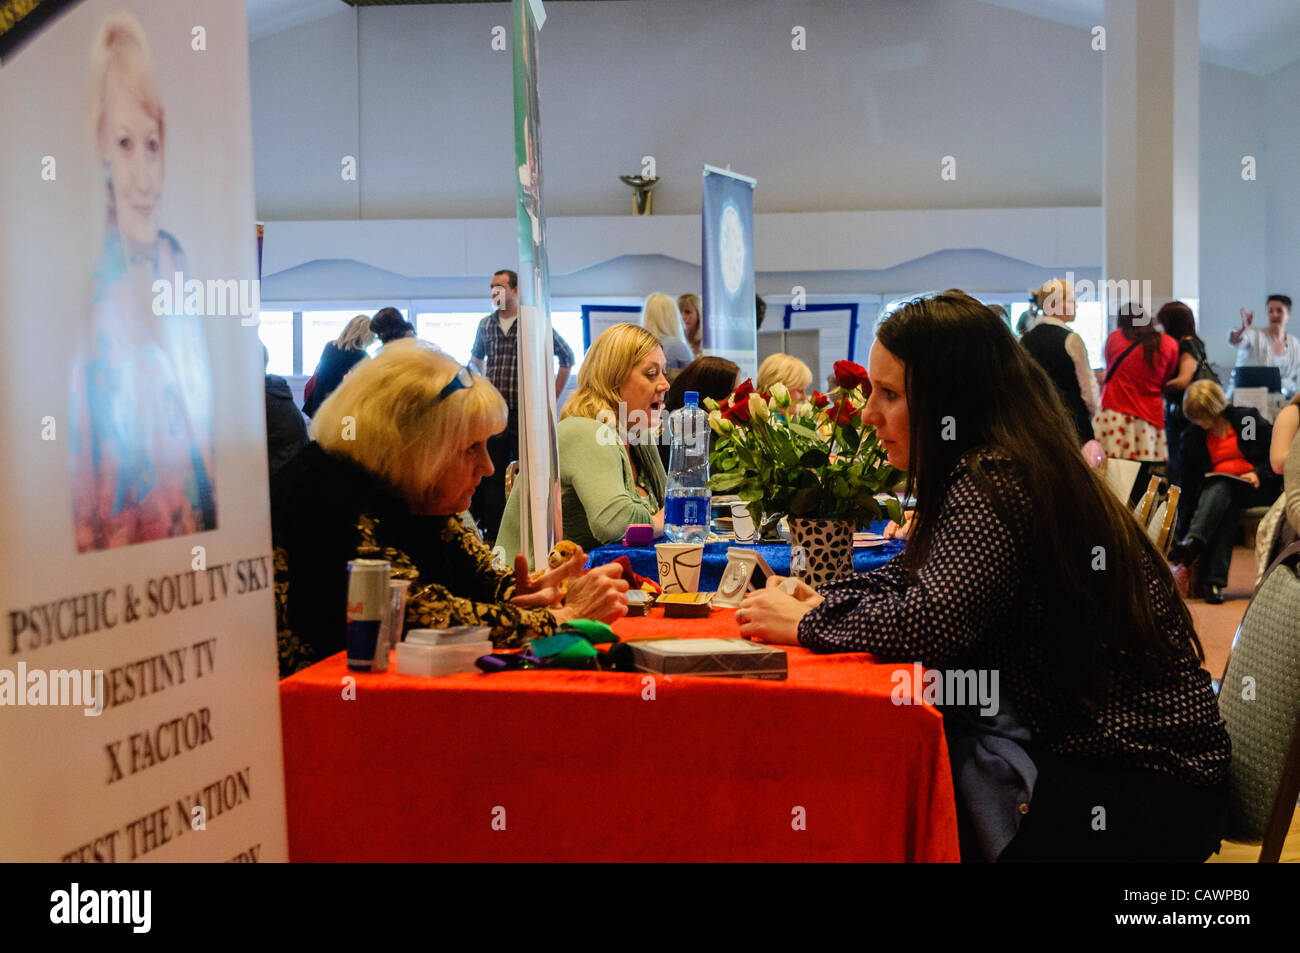 People receive spiritual readings at a New Age Psychic and Holistic Fair Stock Photo